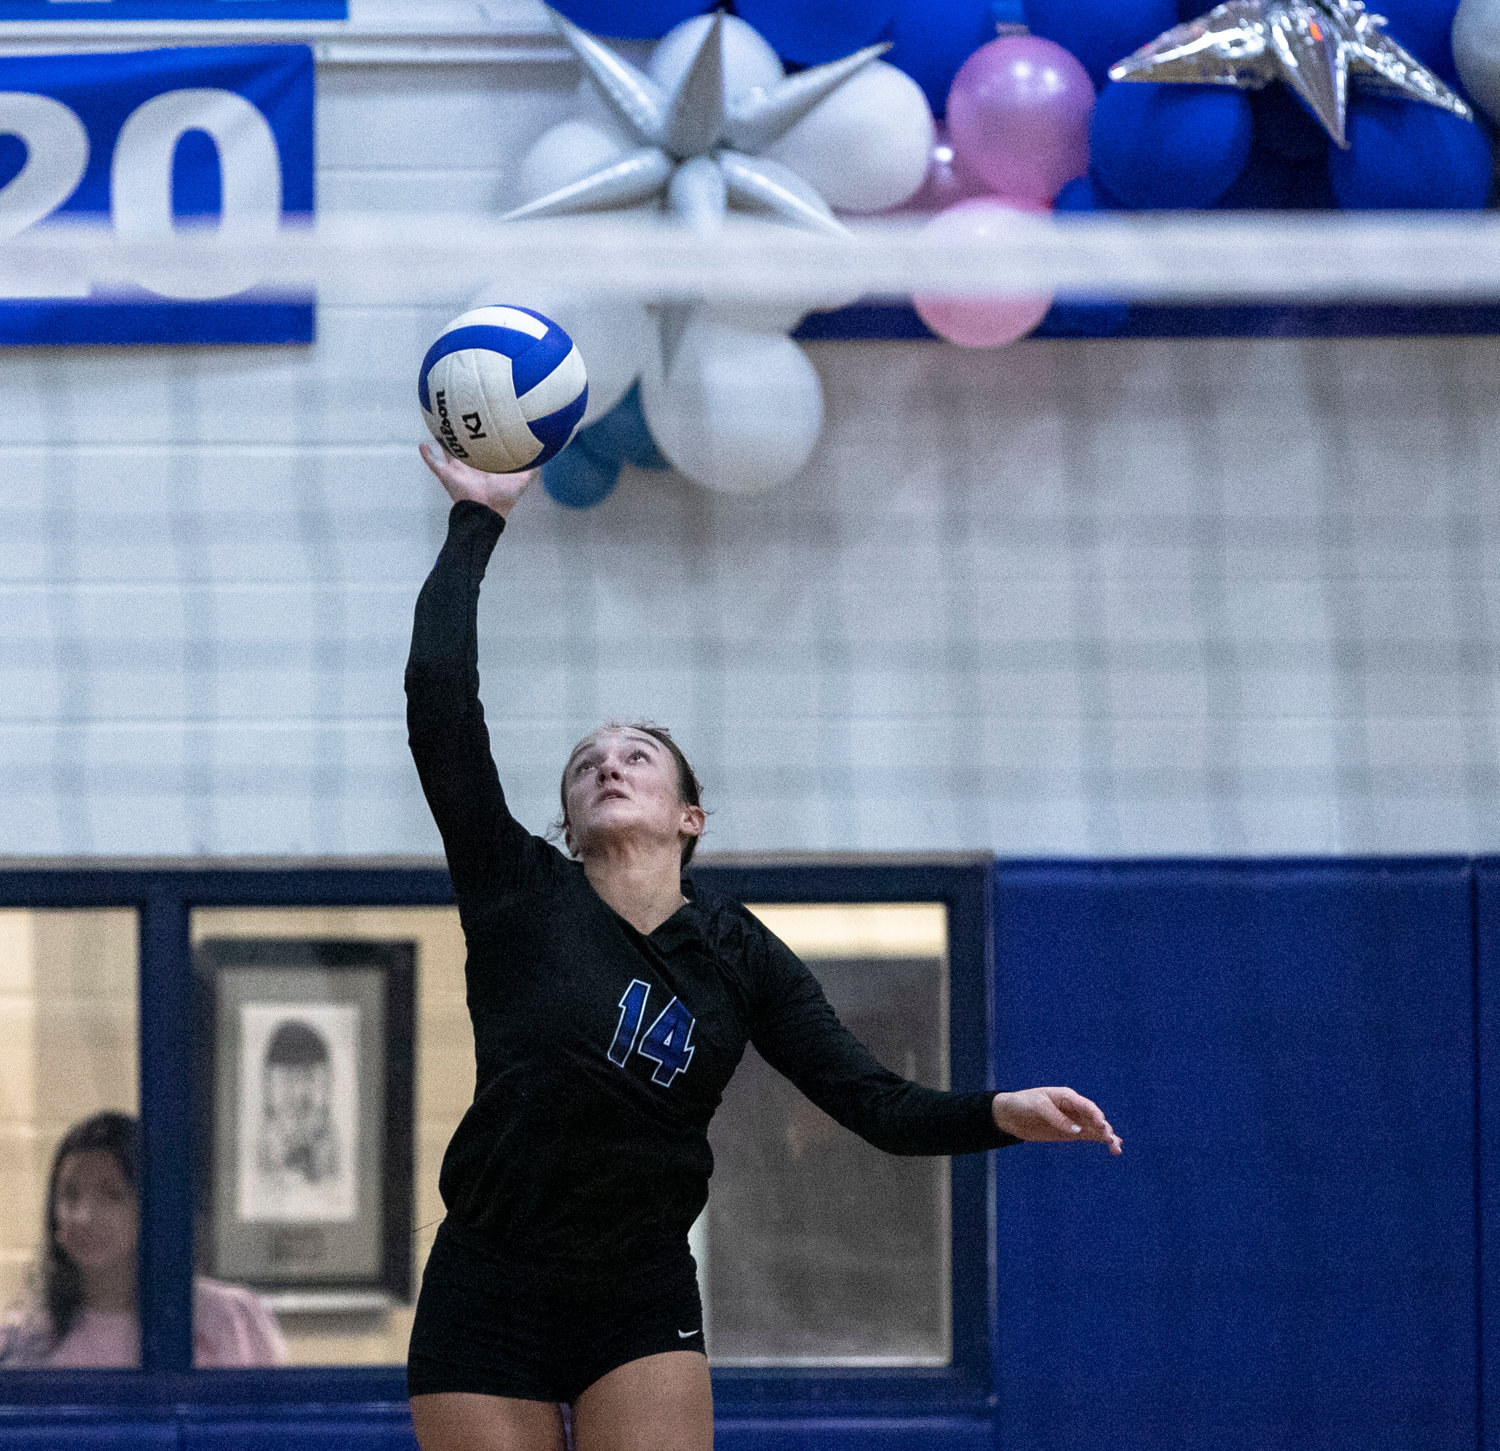 Bayside Academy junior Blakeley Robbins connects on a serve during the Admirals’ semifinal match against the Baldwin County Tigers at the Class 6A Area 2 tournament at Bayside Academy Thursday, Oct. 13. The Admirals will take the No. 2 seed into the South Super Regionals starting Oct. 19.